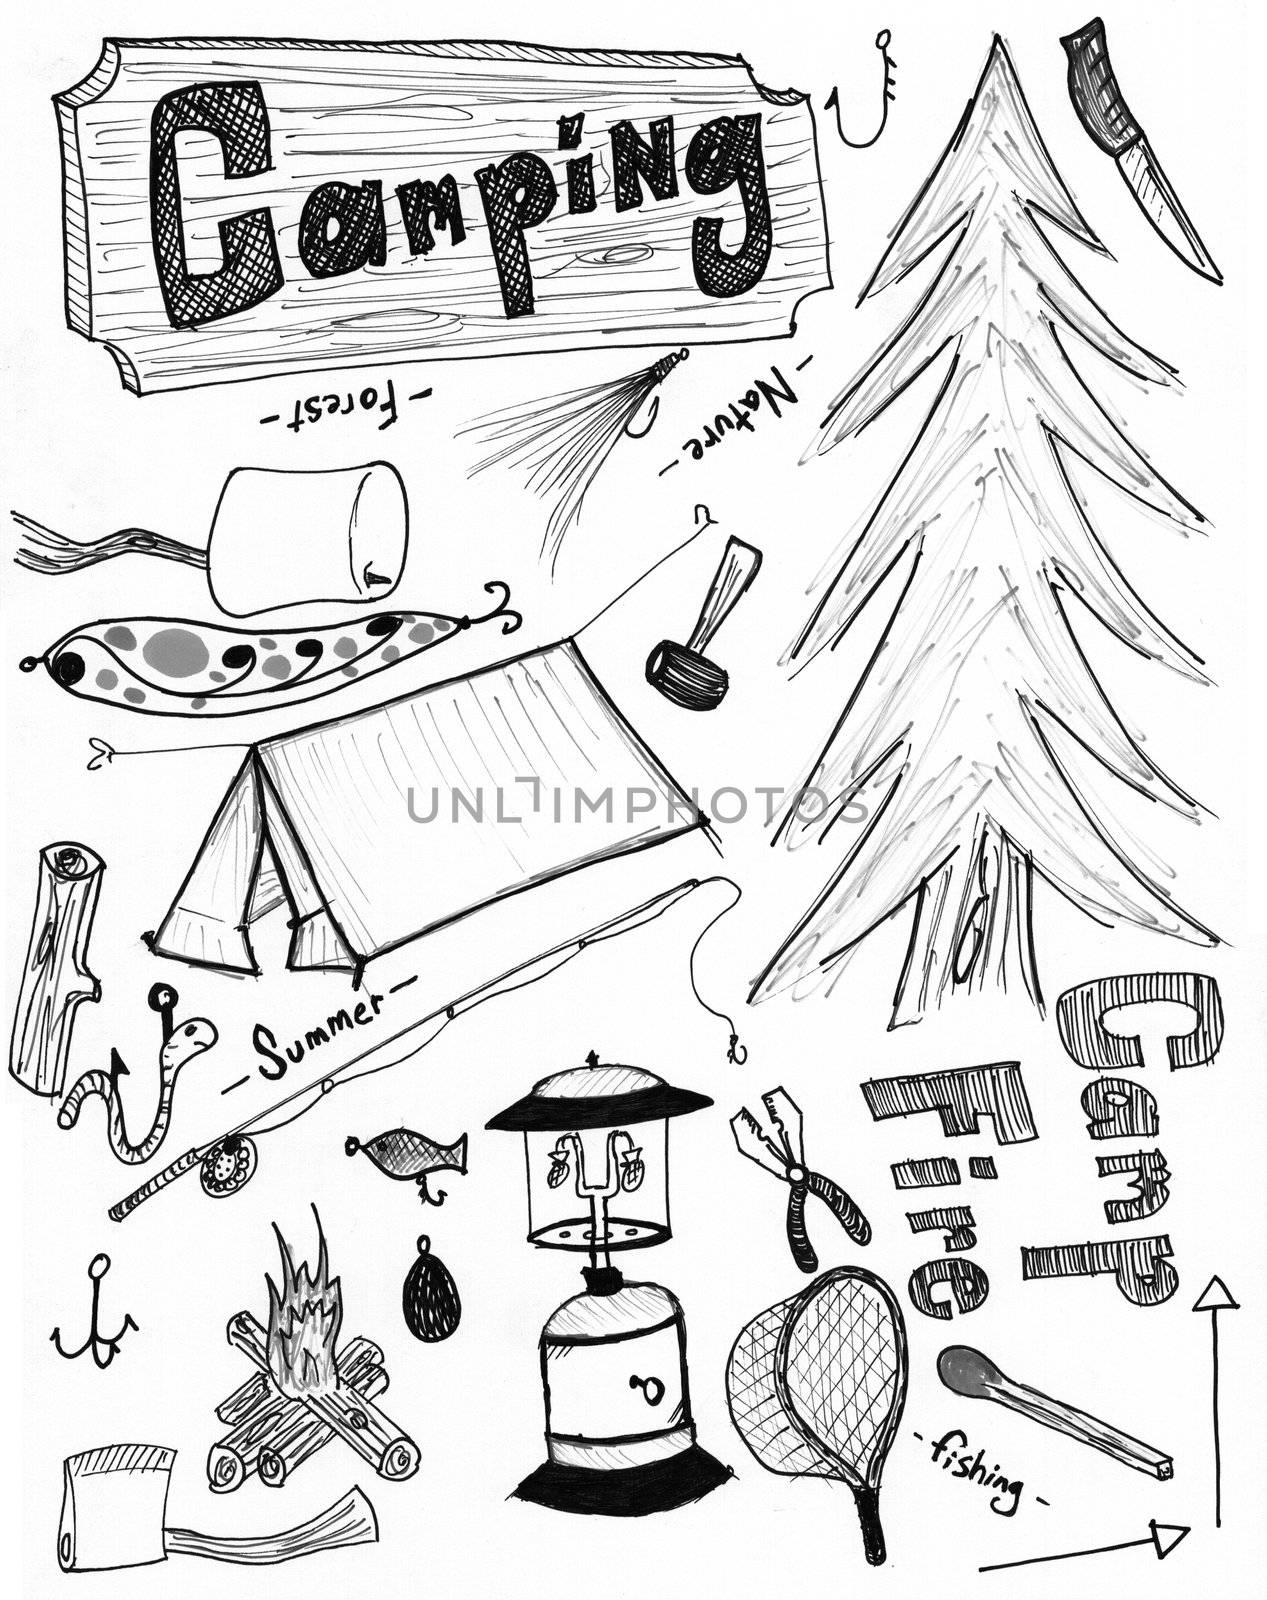 Campingg hand drawn doodles by jeremywhat